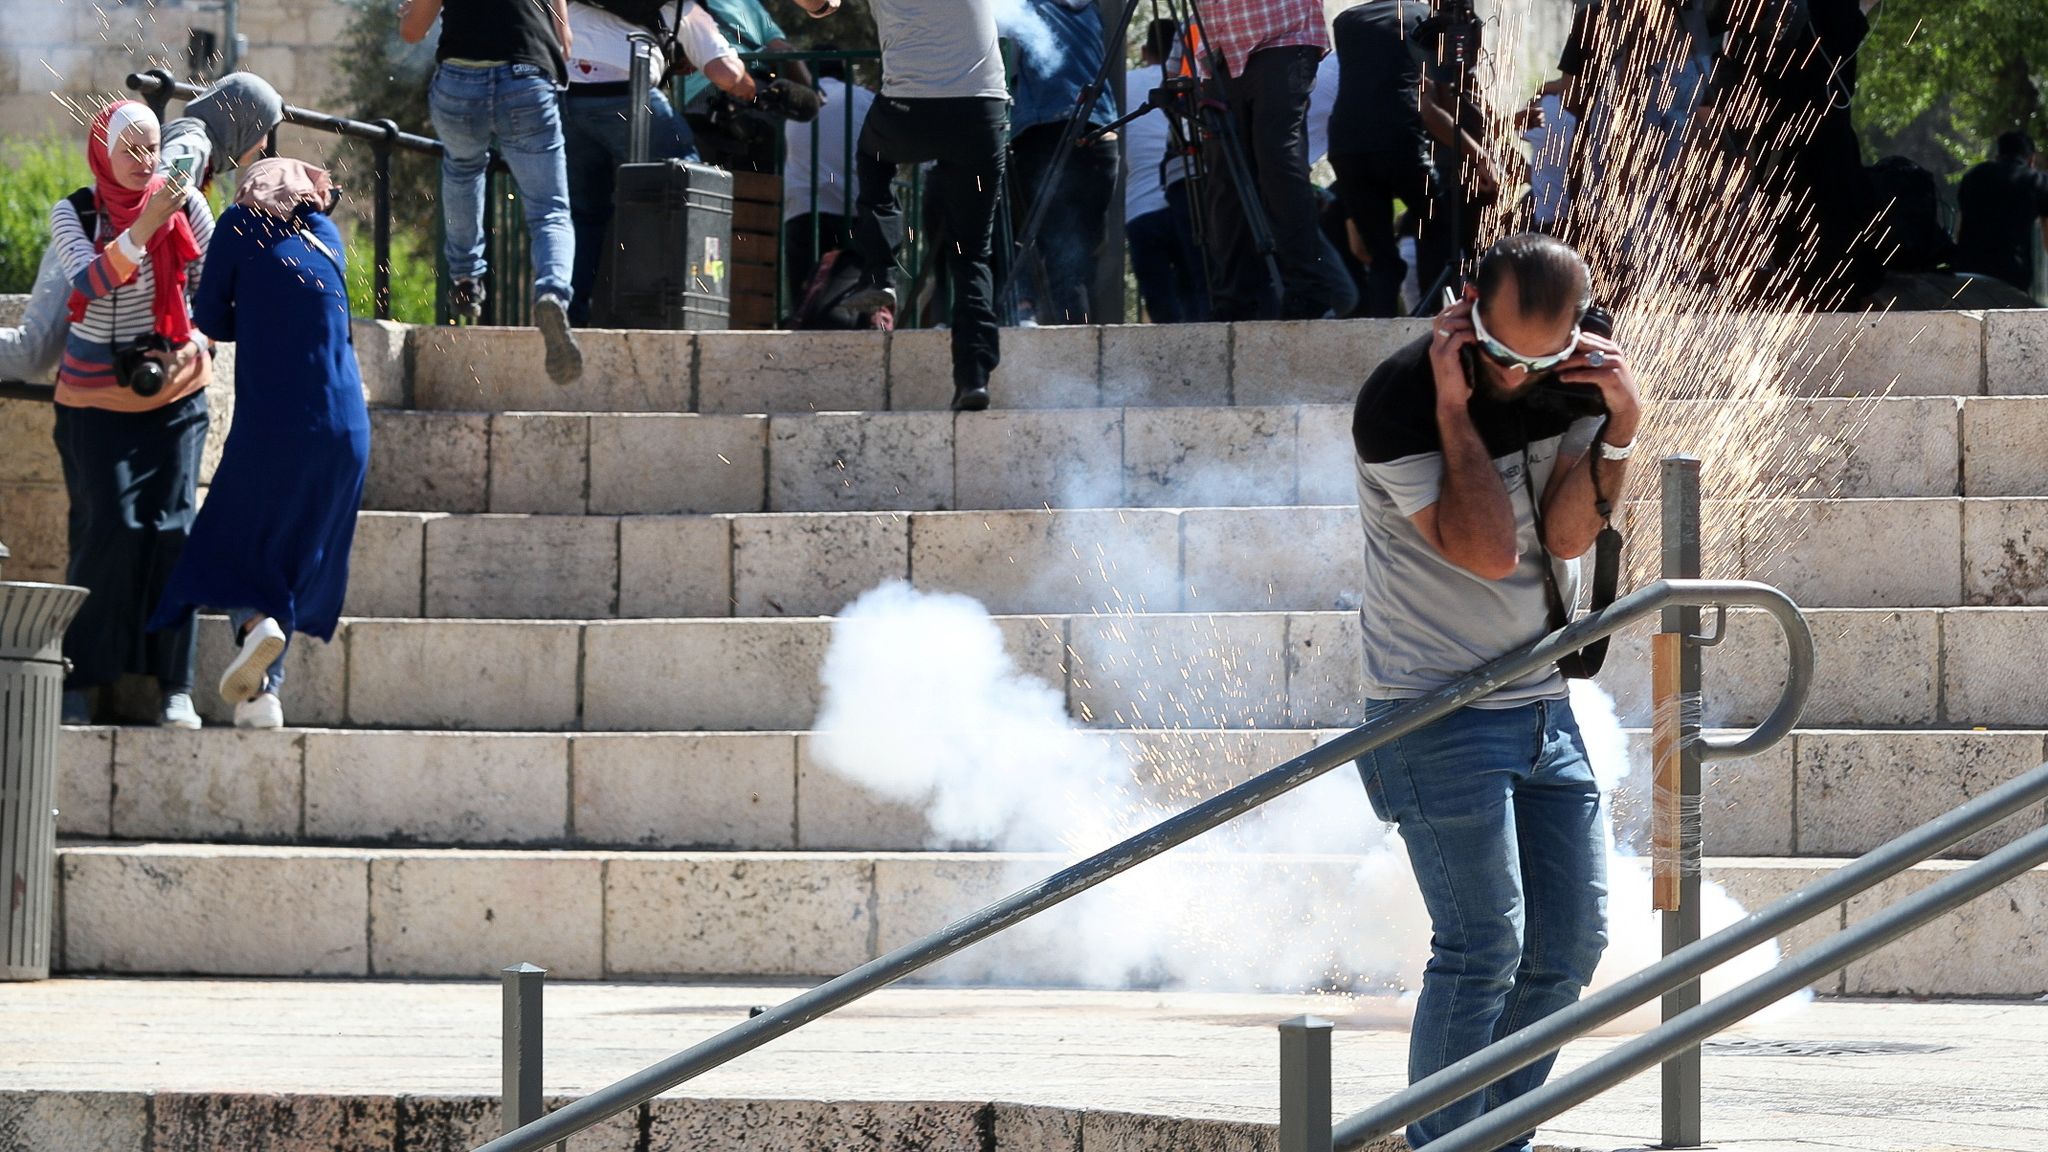 Pro-Palestinian demonstrators targeted by apparent stink bomb at